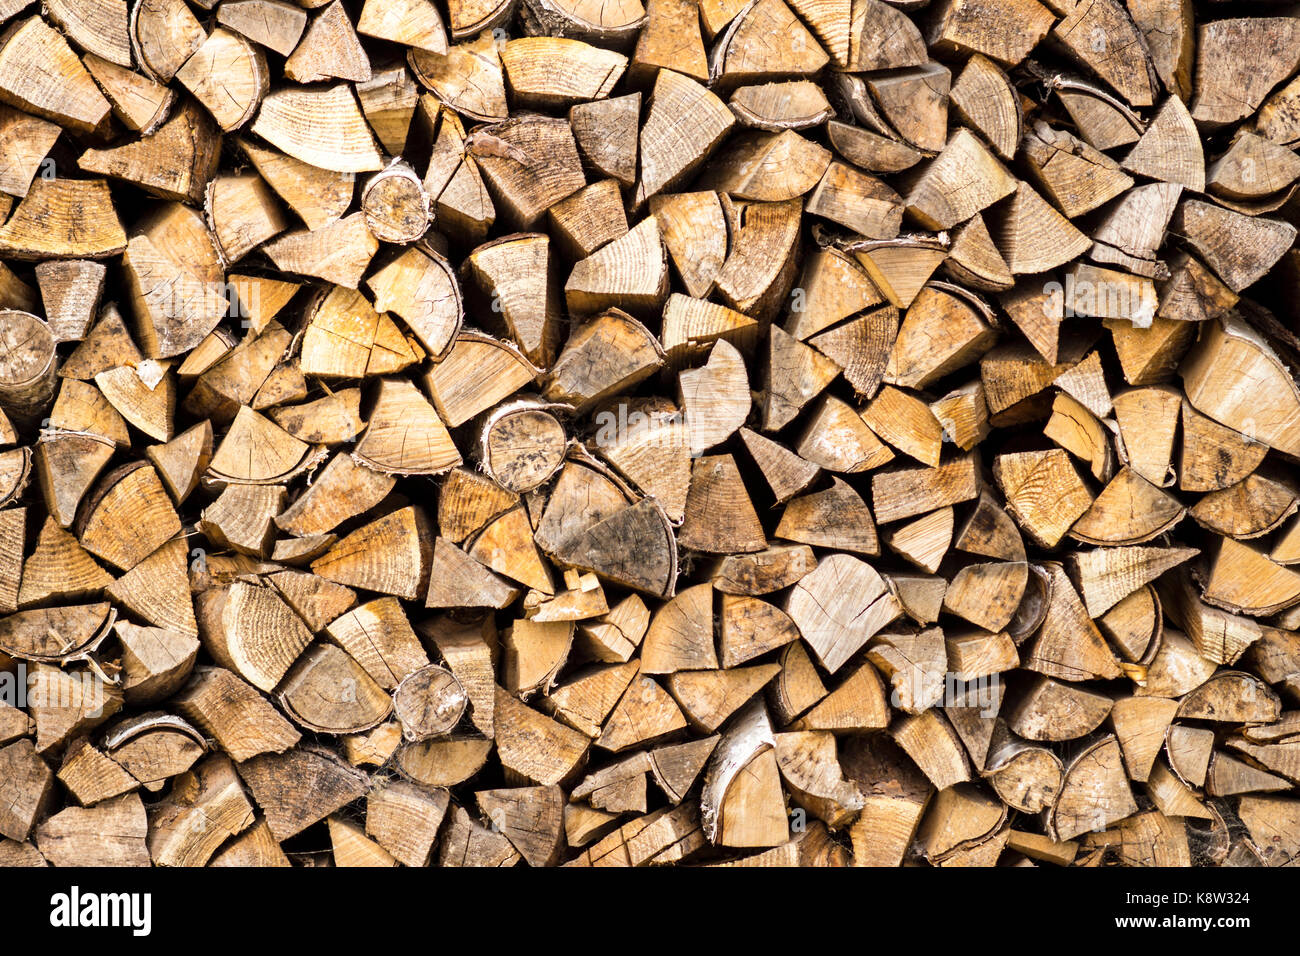 Firewood stacked for winter storage, and dried Stock Photo